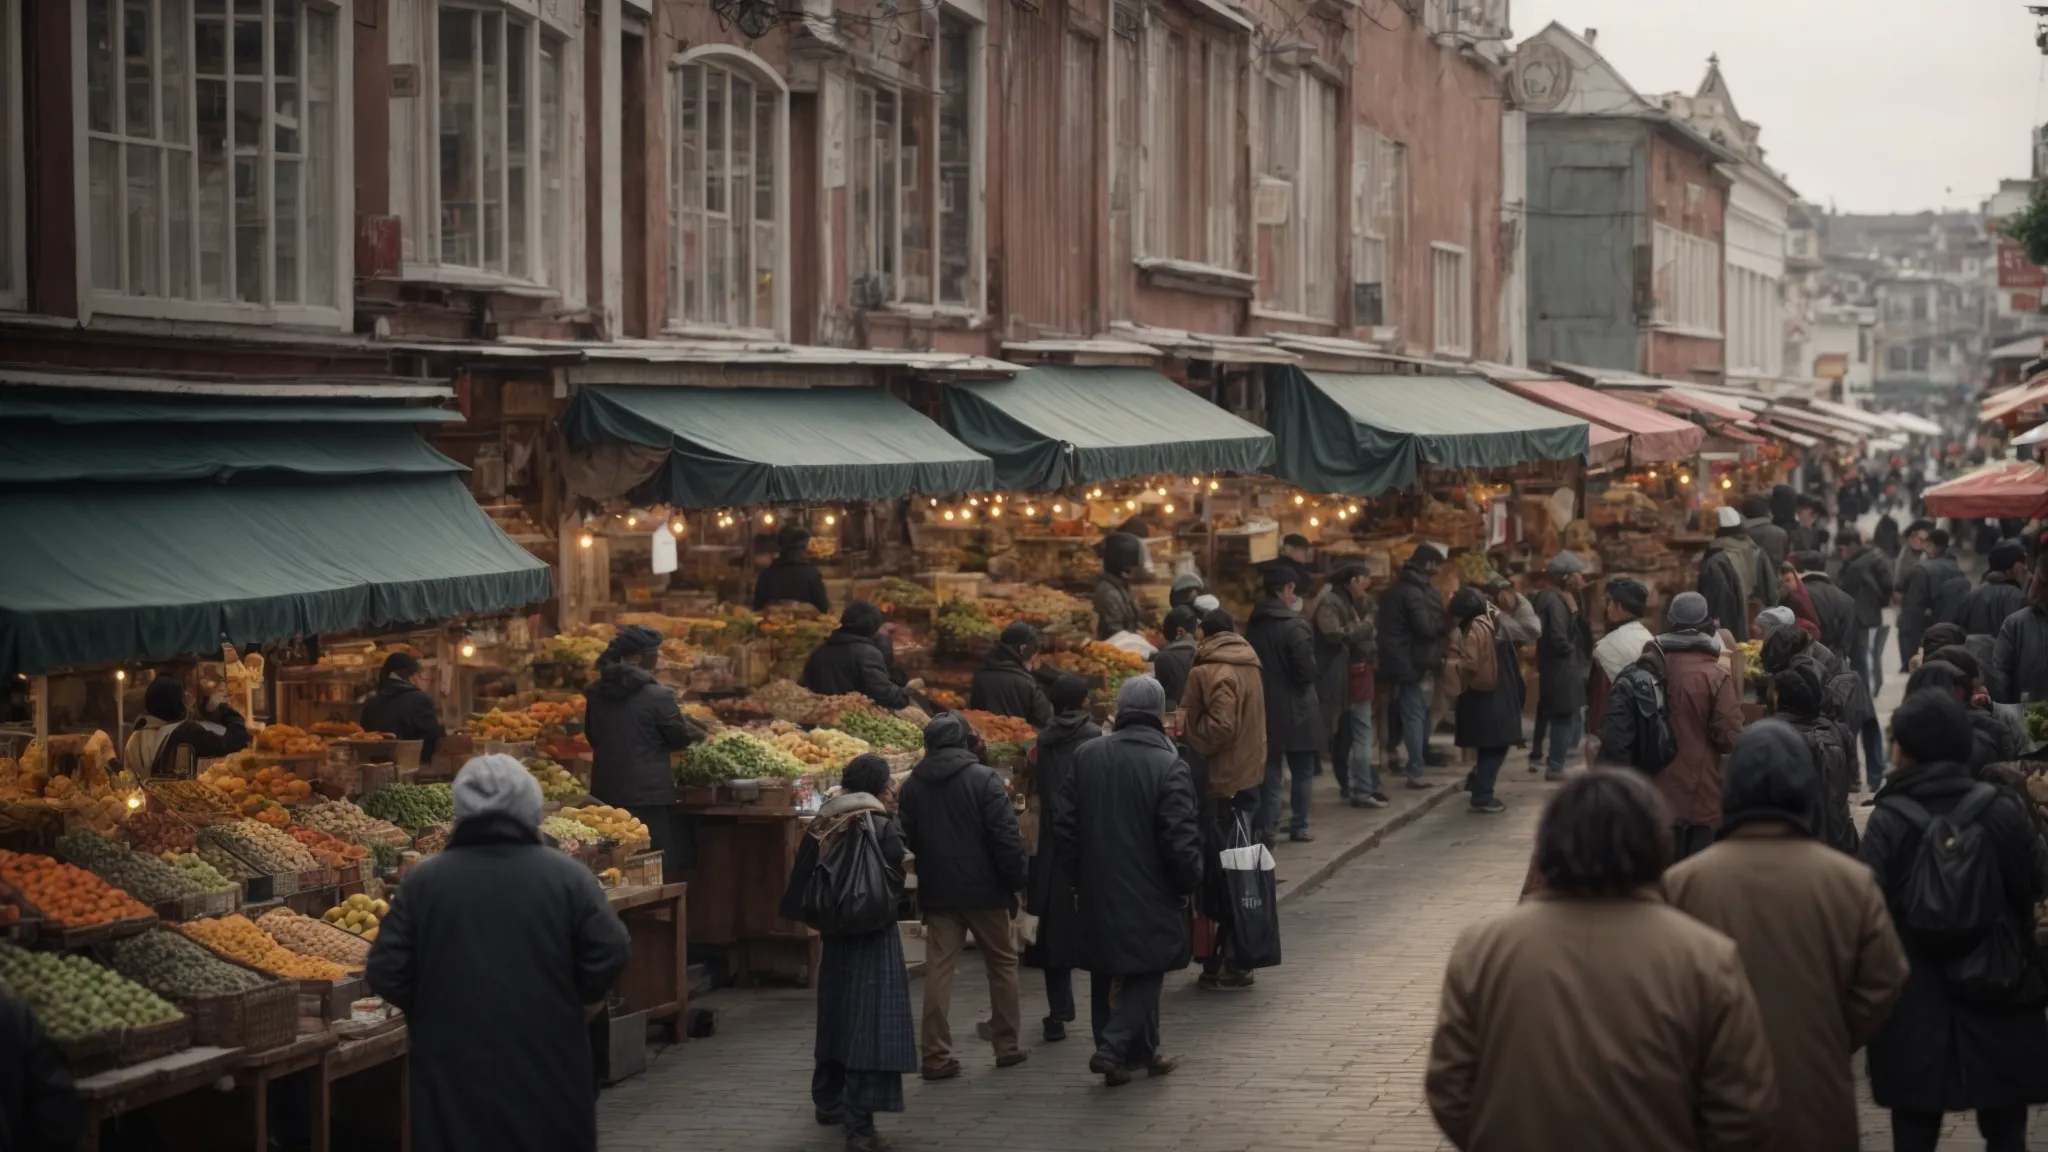 a bustling local marketplace with various storefronts attracting a crowd of shoppers.